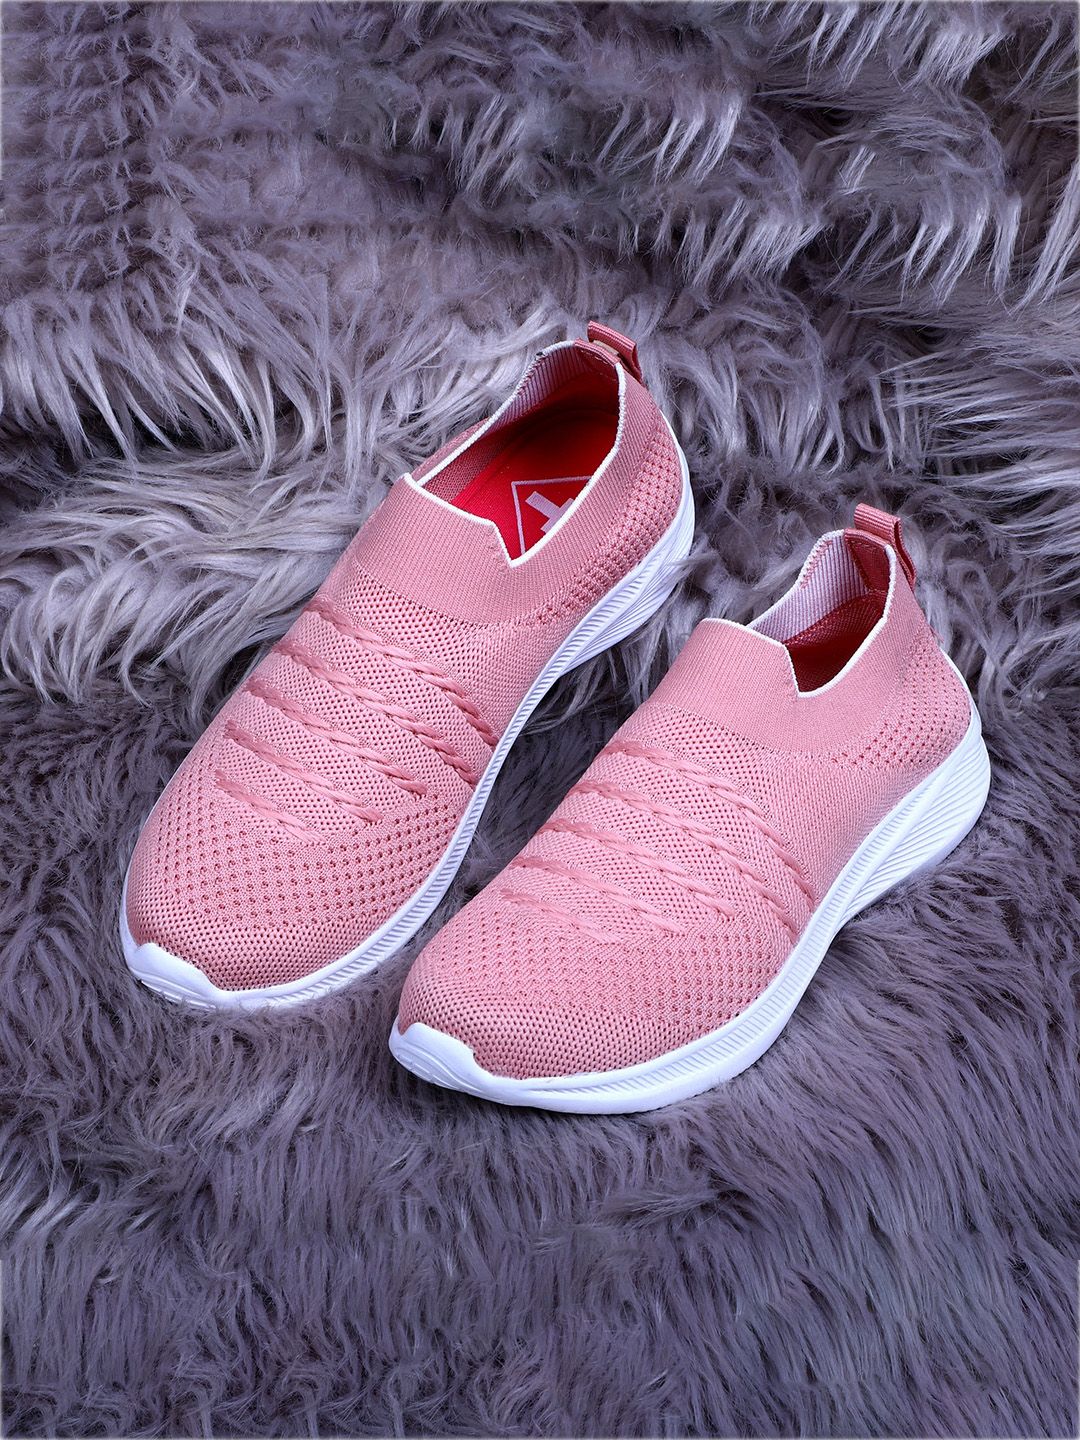 TPENT Women Peach-Coloured Mesh Running Non-Marking Shoes Price in India